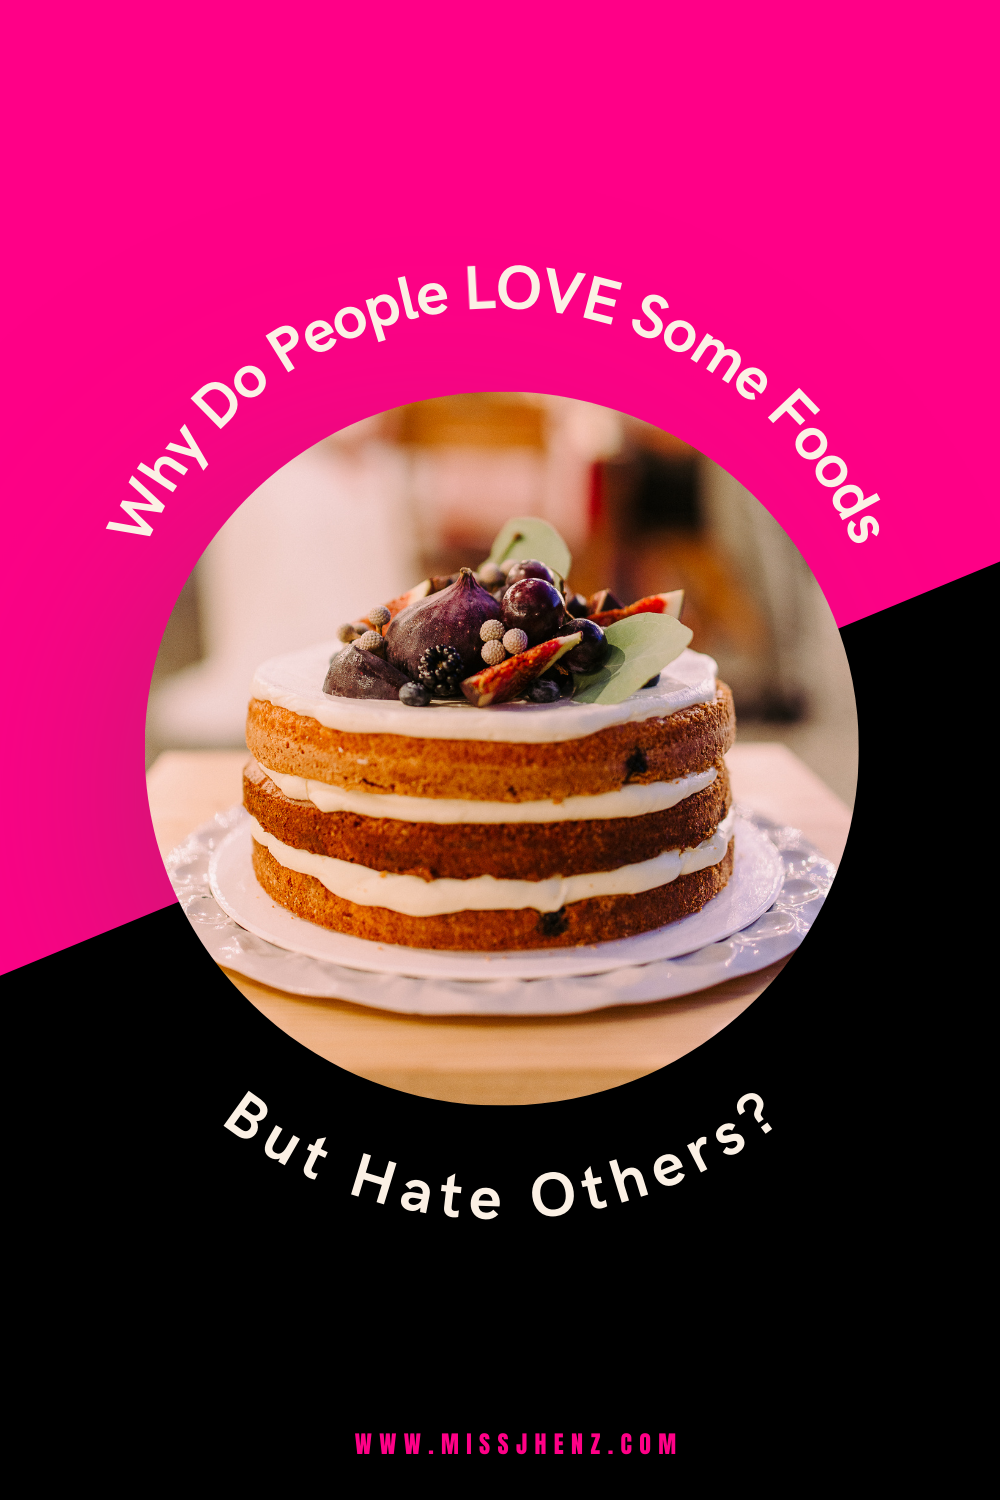 Why Do People LOVE Some Foods, But Hate Others?